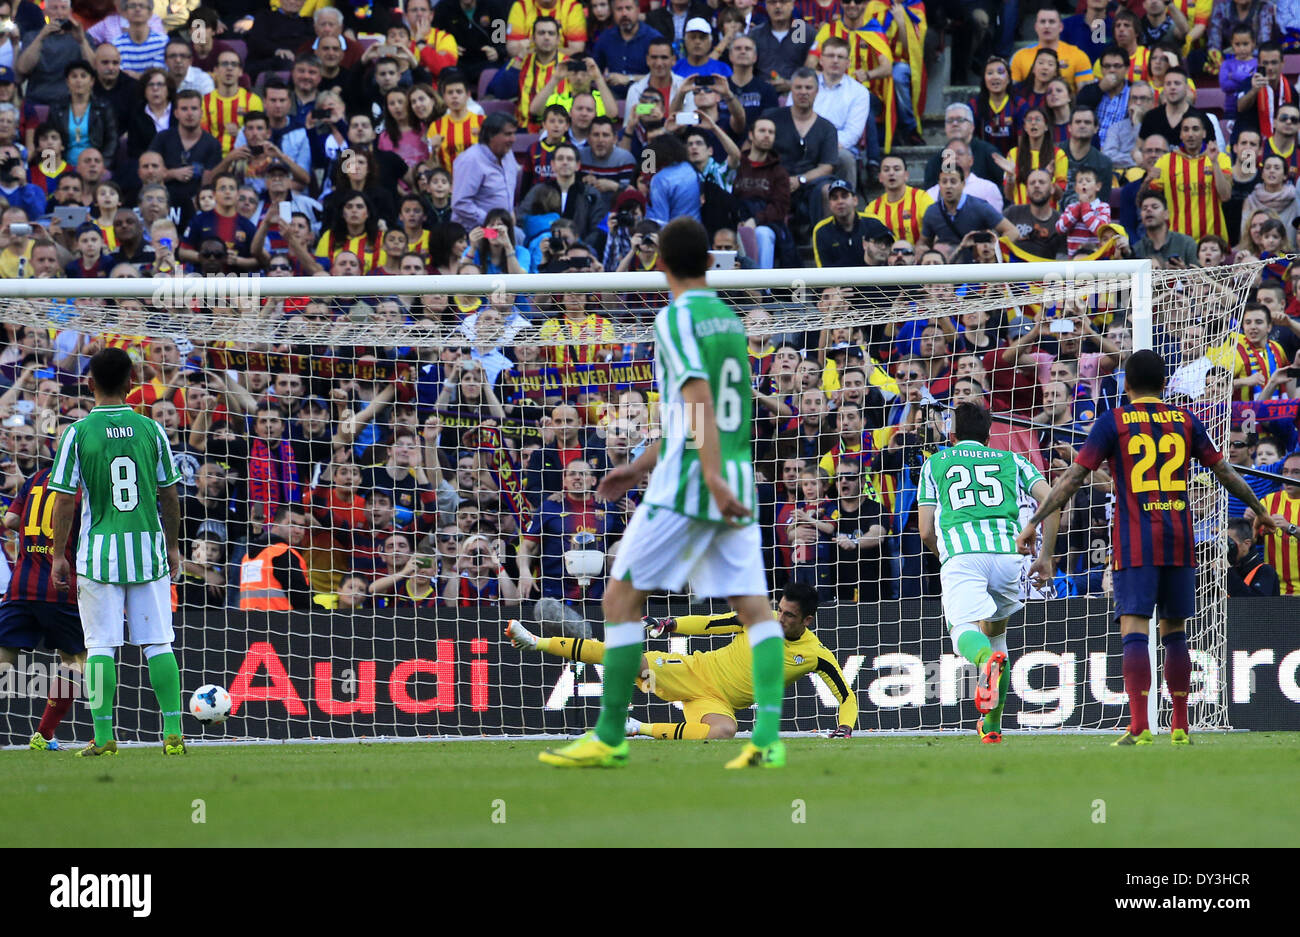 Barcelona, Spain. 5th Apr, 2014. Leo Messi goal in the match between FC Barcelona and Betis for the week 32 of the spanish league, played at the Camp Nou on 5 april, 2014. Photo: Joan Valls/Urbanandsport/Nurphoto. © Joan Valls/NurPhoto/ZUMAPRESS.com/Alamy Live News Stock Photo